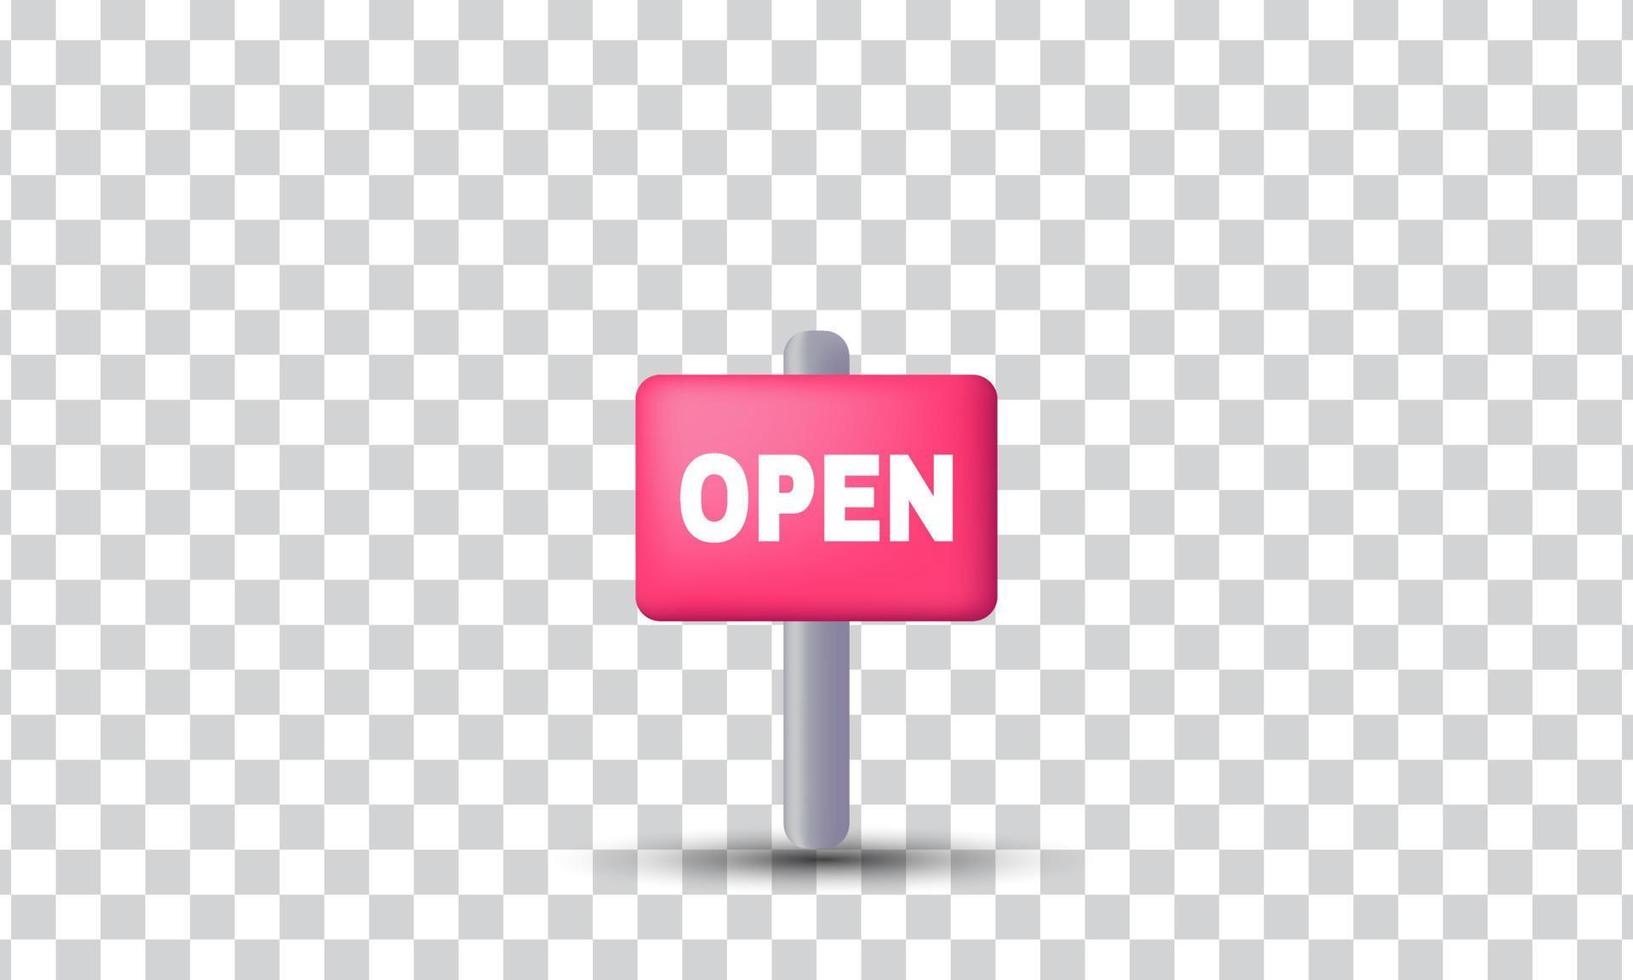 unique 3d open sign concept design icon isolated on vector